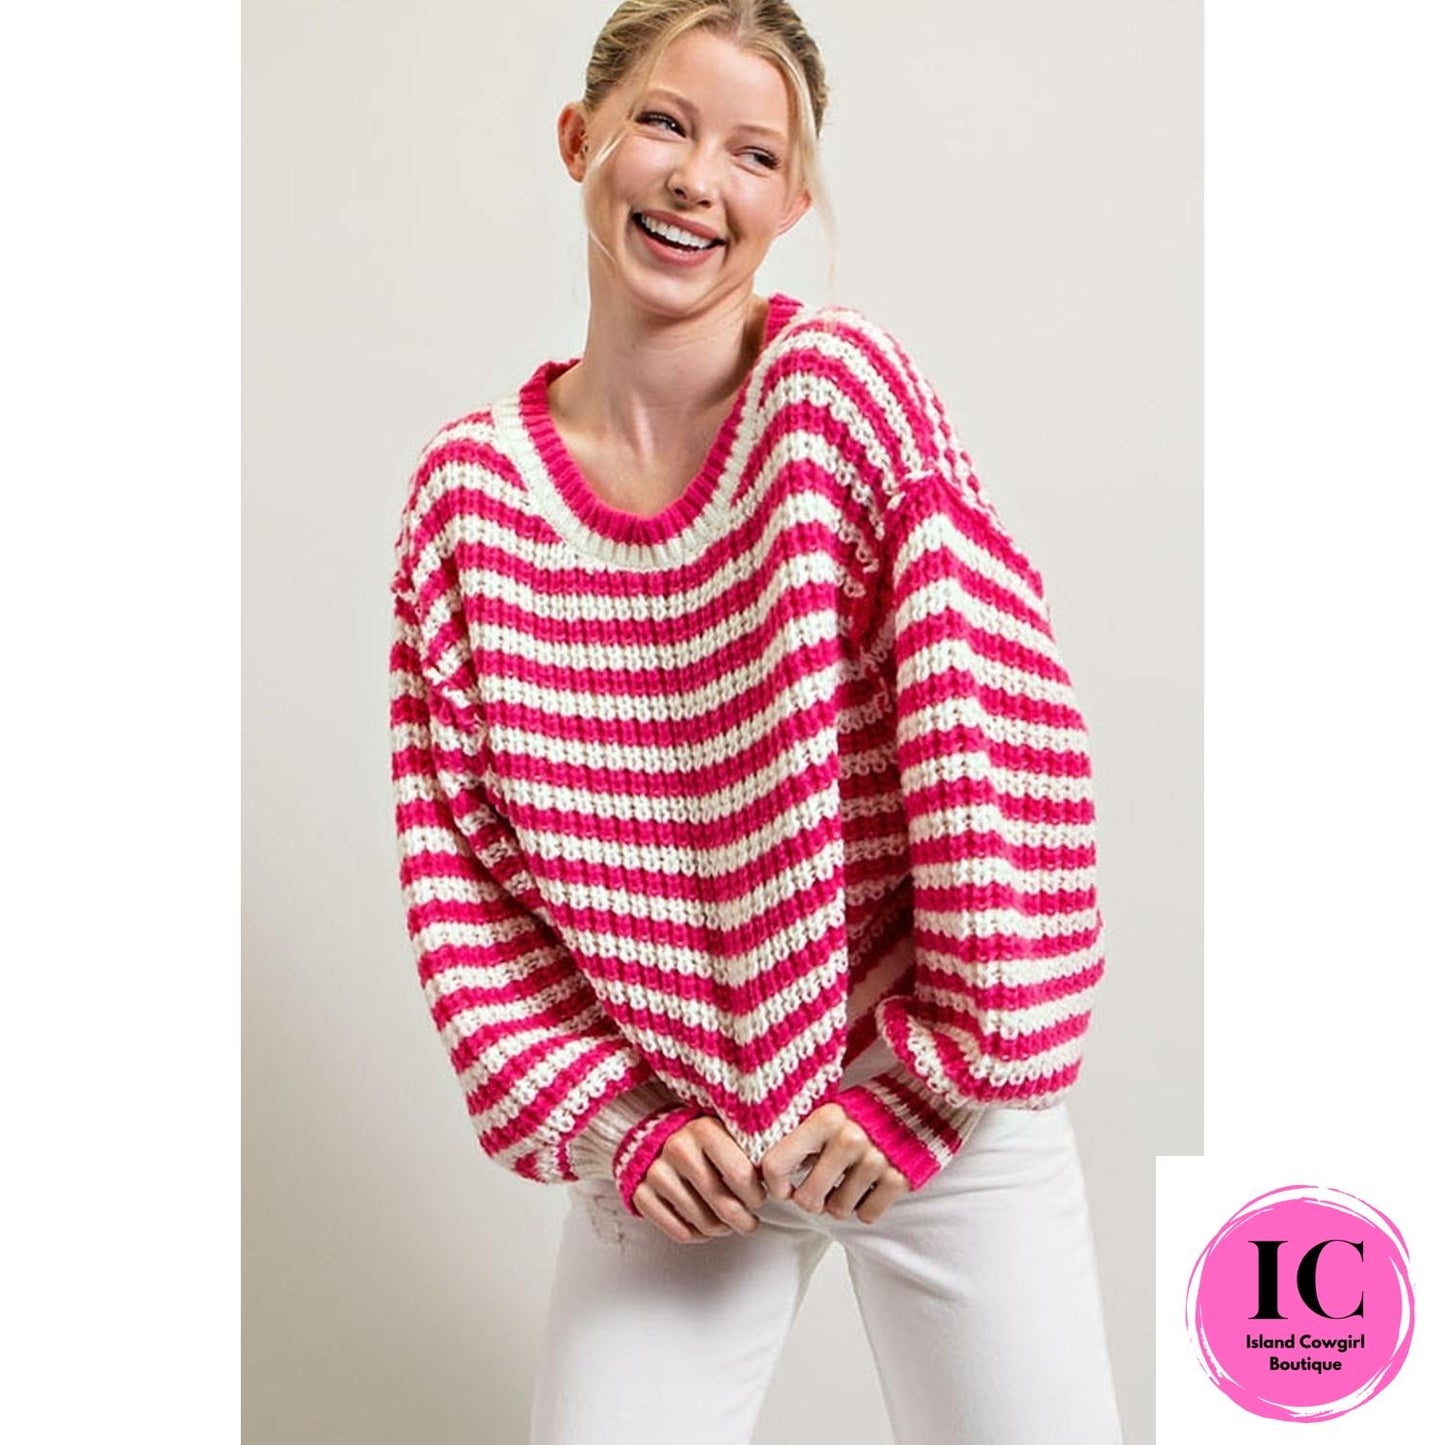 You're The One Hot Pink Striped Sweater